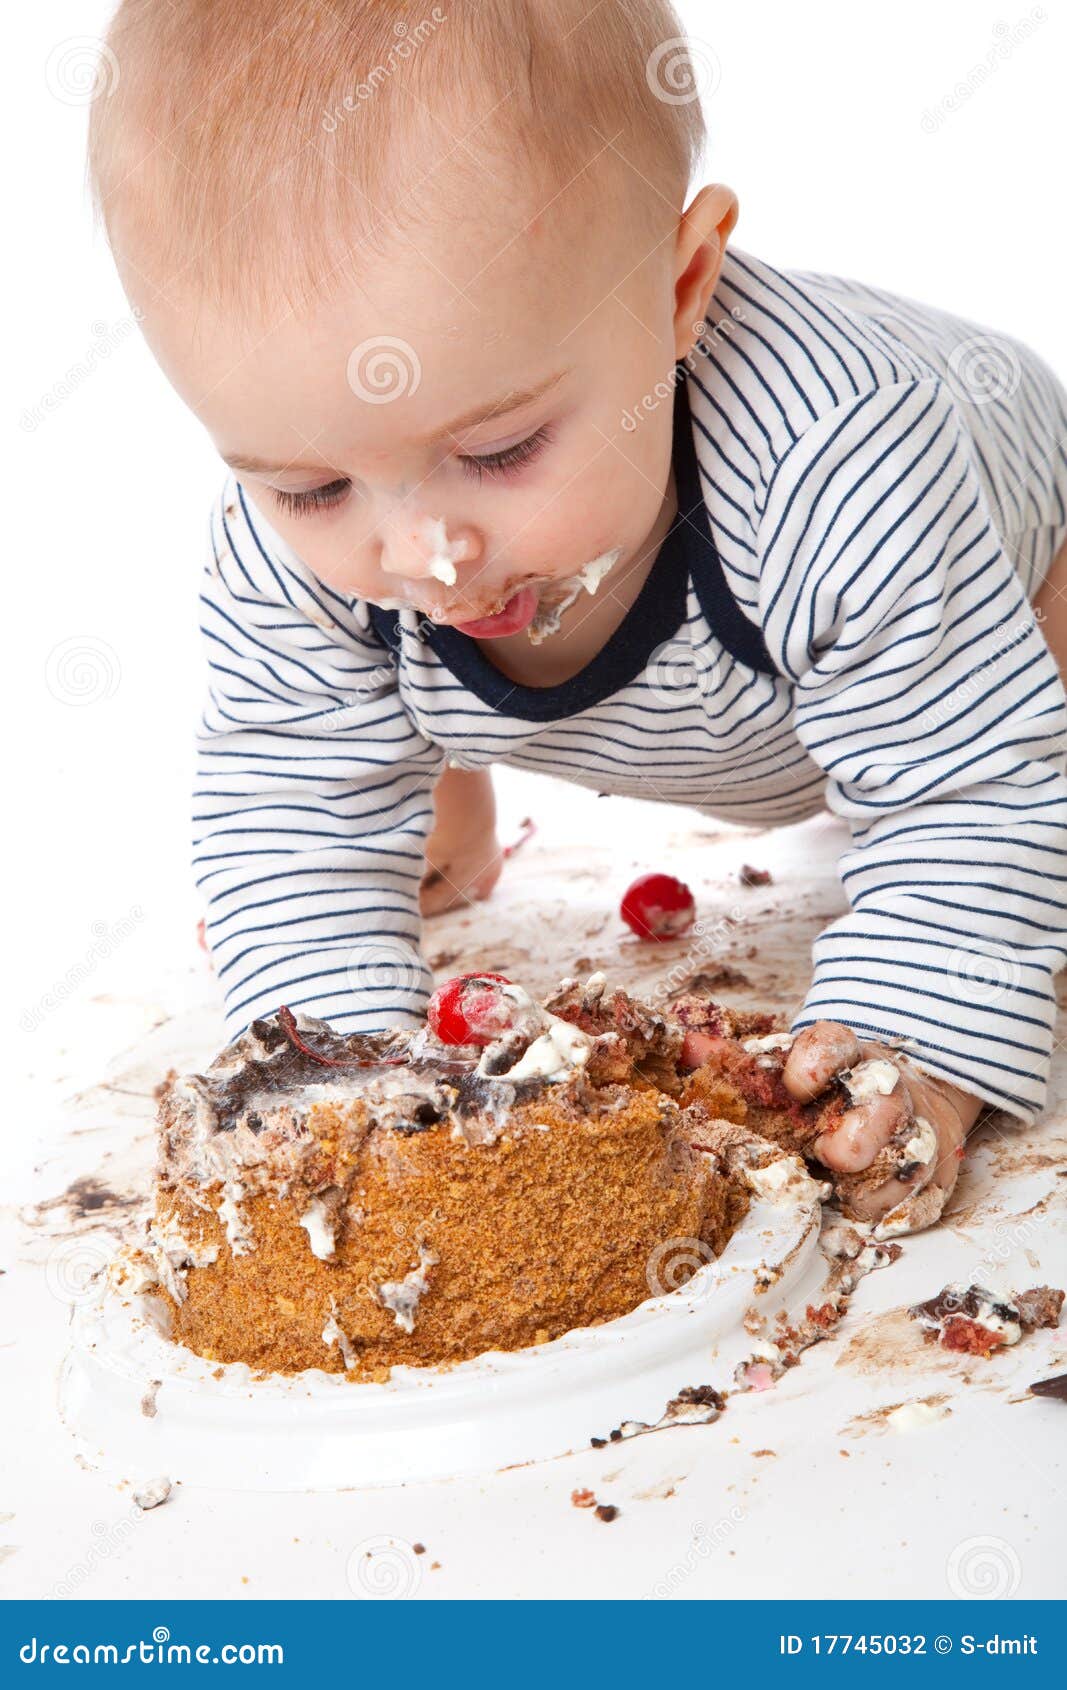 Half Eaten Cake Stock Photo, Picture and Royalty Free Image. Image 54116106.